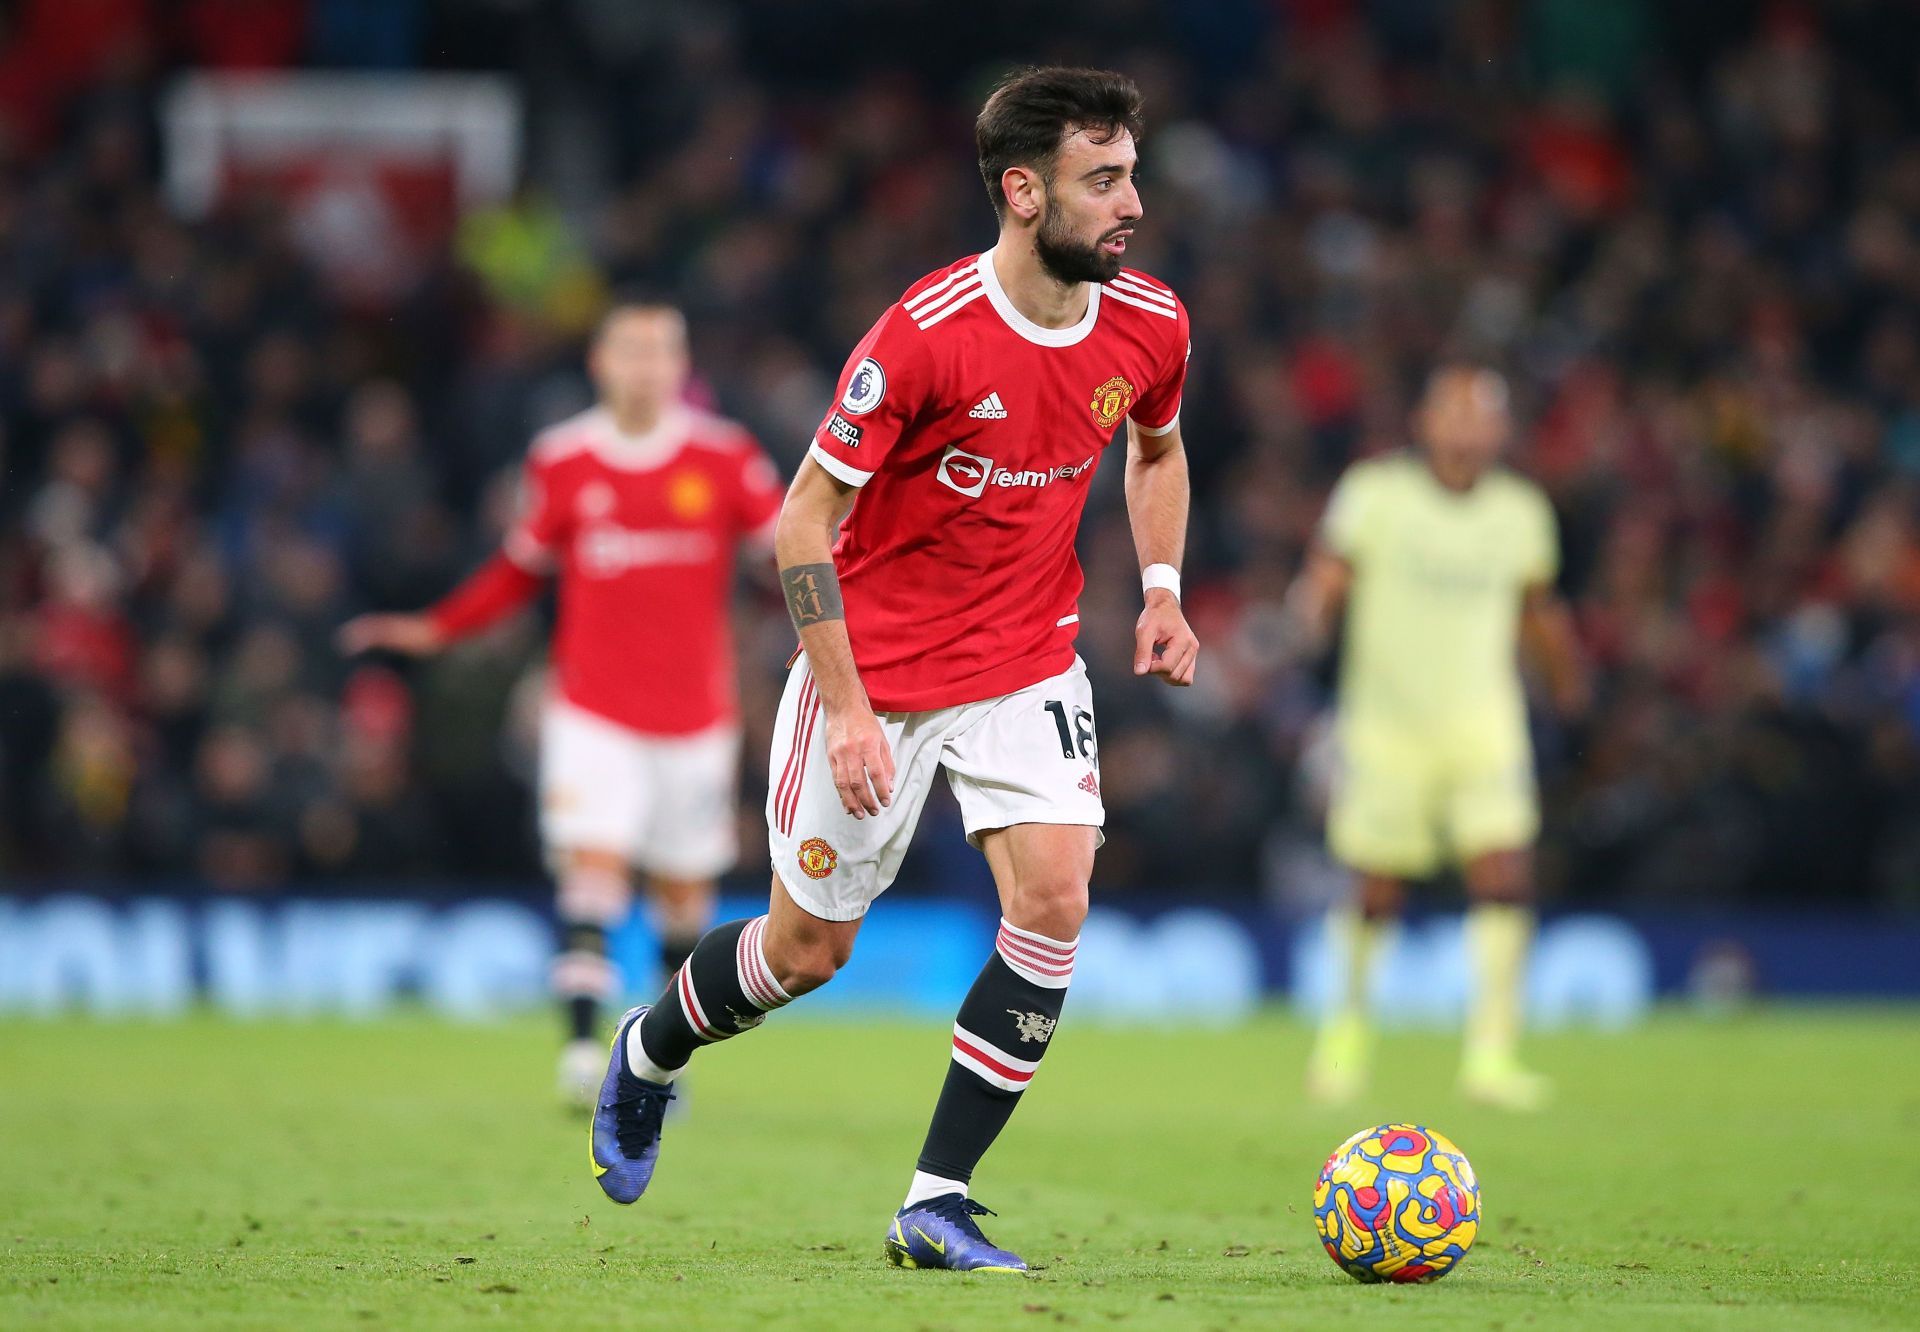 Manchester United had to rely a lot on Bruno Fernandes